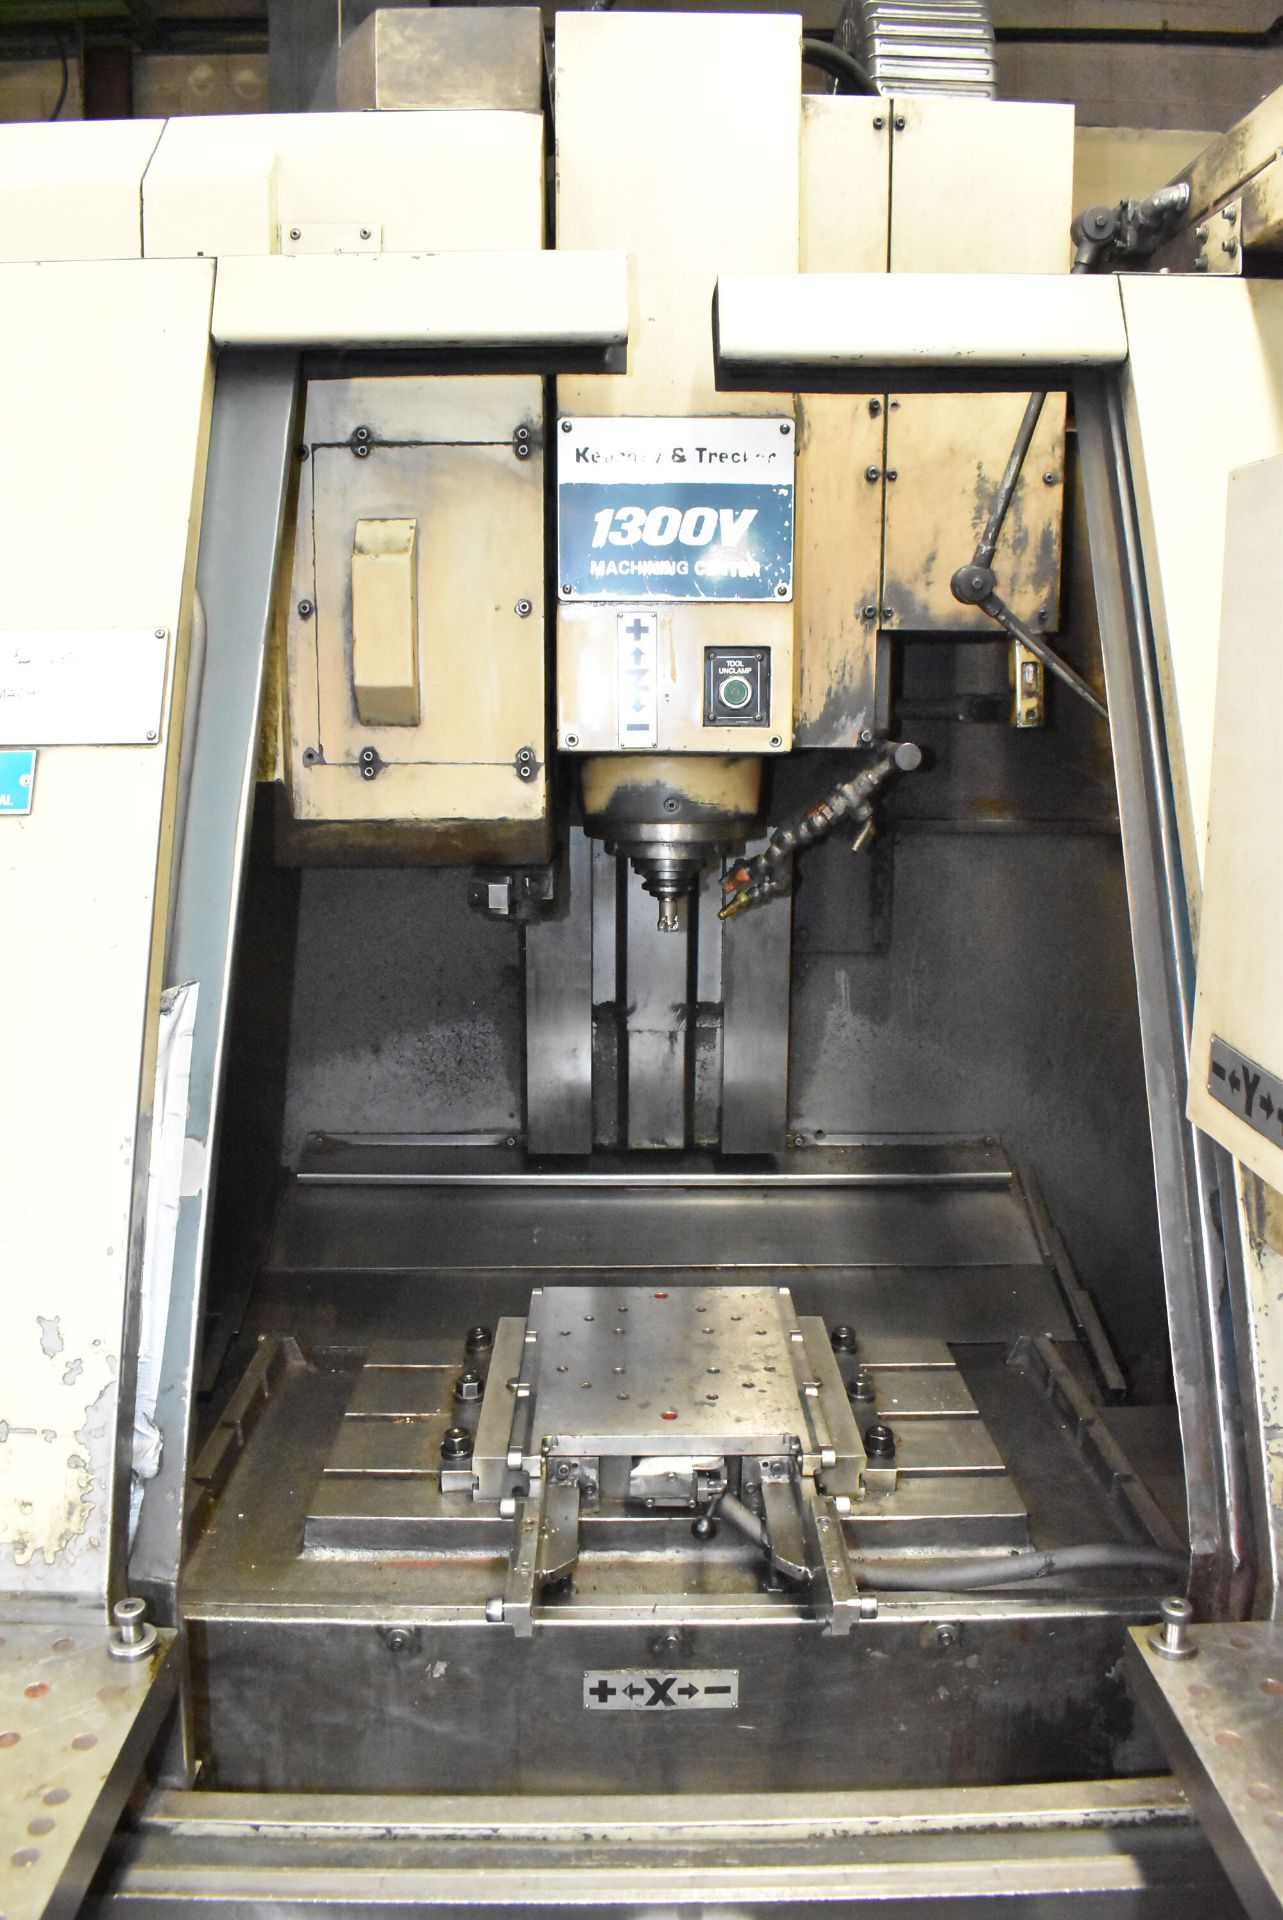 KT KEARNEY & TRECKER 1300V CNC VERTICAL MACHINING CENTERS WITH FANUC SERIES O-M CNC CONTROL, 16.5" X - Image 4 of 8